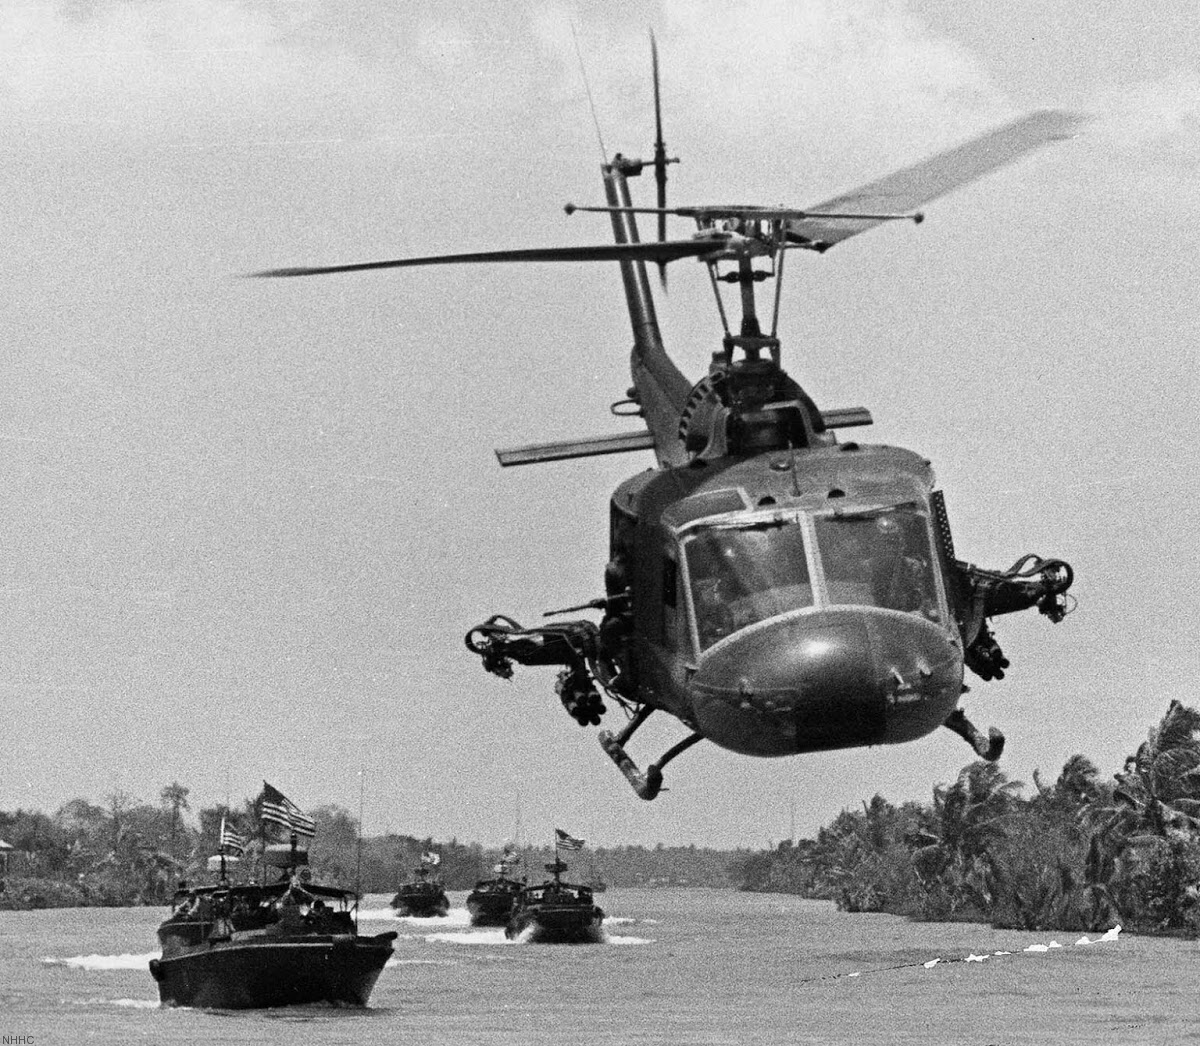 hal-3 seawolves helicopter attack squadron light us navy uh-1e huey 13 vietnam